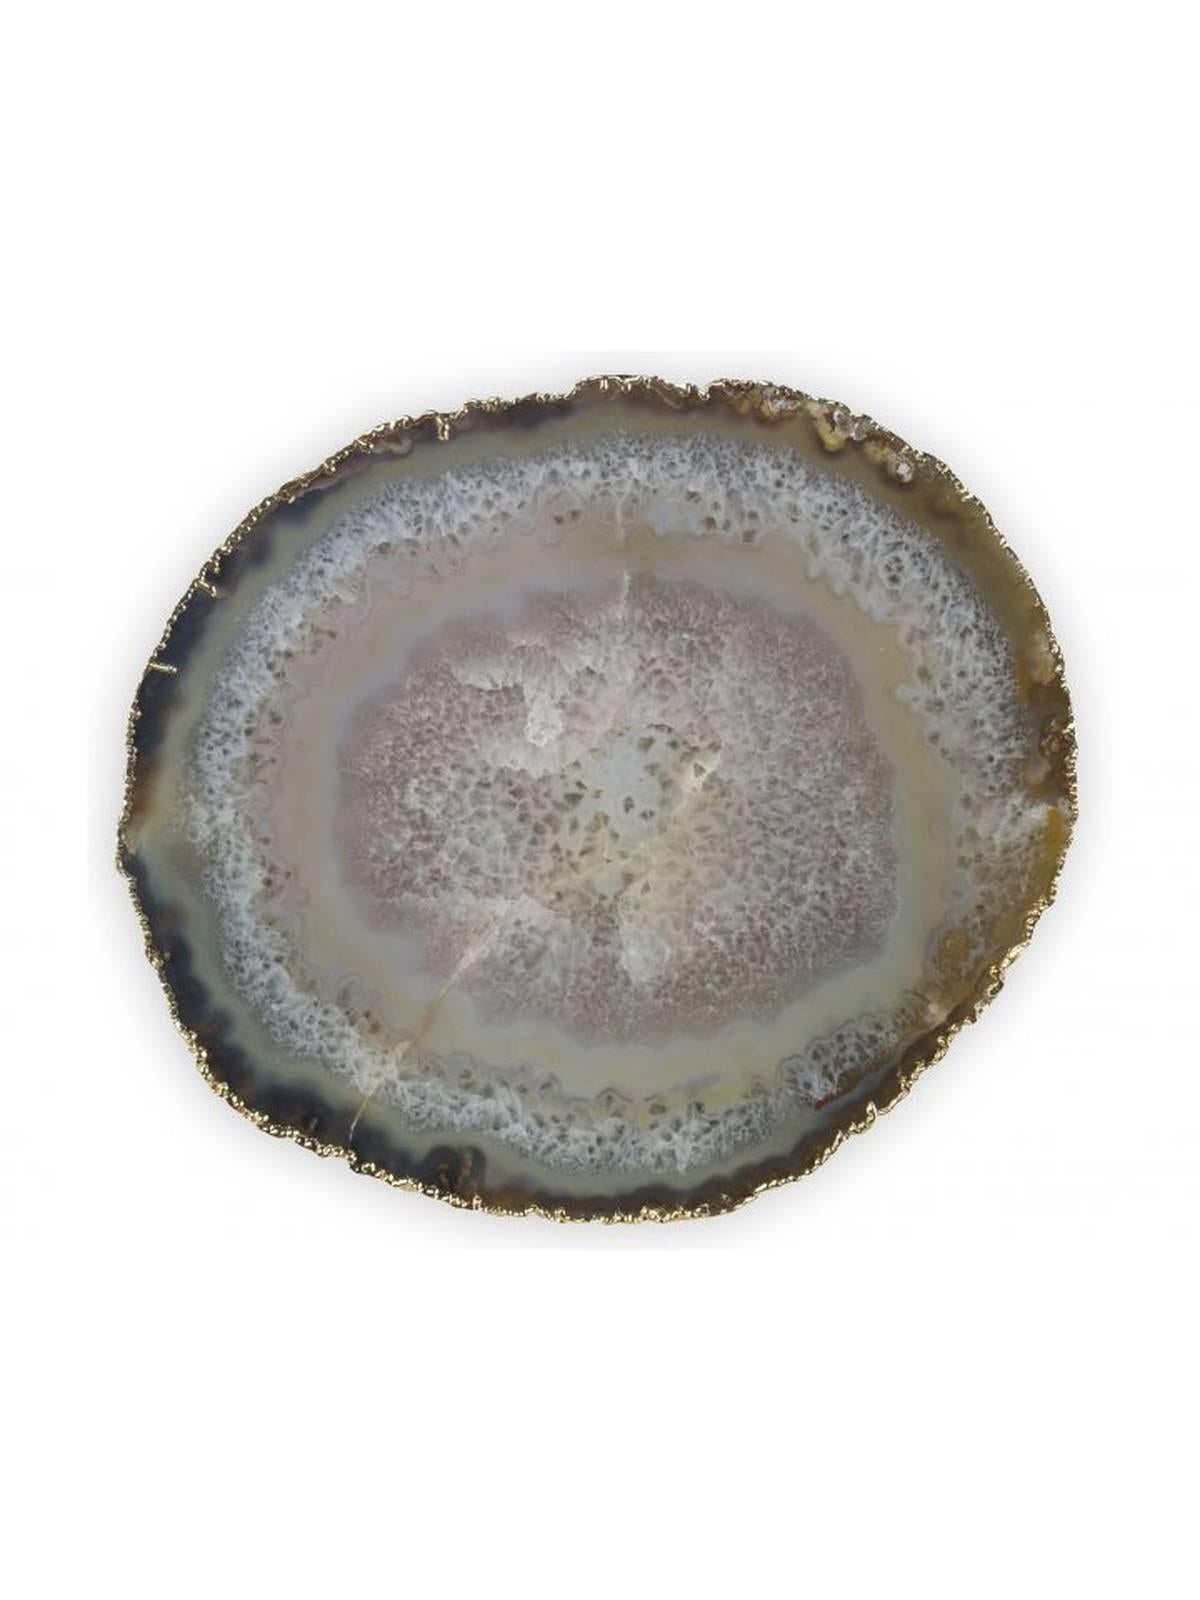 Polished footed thick agate slab plate with 18-karat gold electroplated rim. A natural product, each is somewhat unique with size variations ranging from approximately 6.5